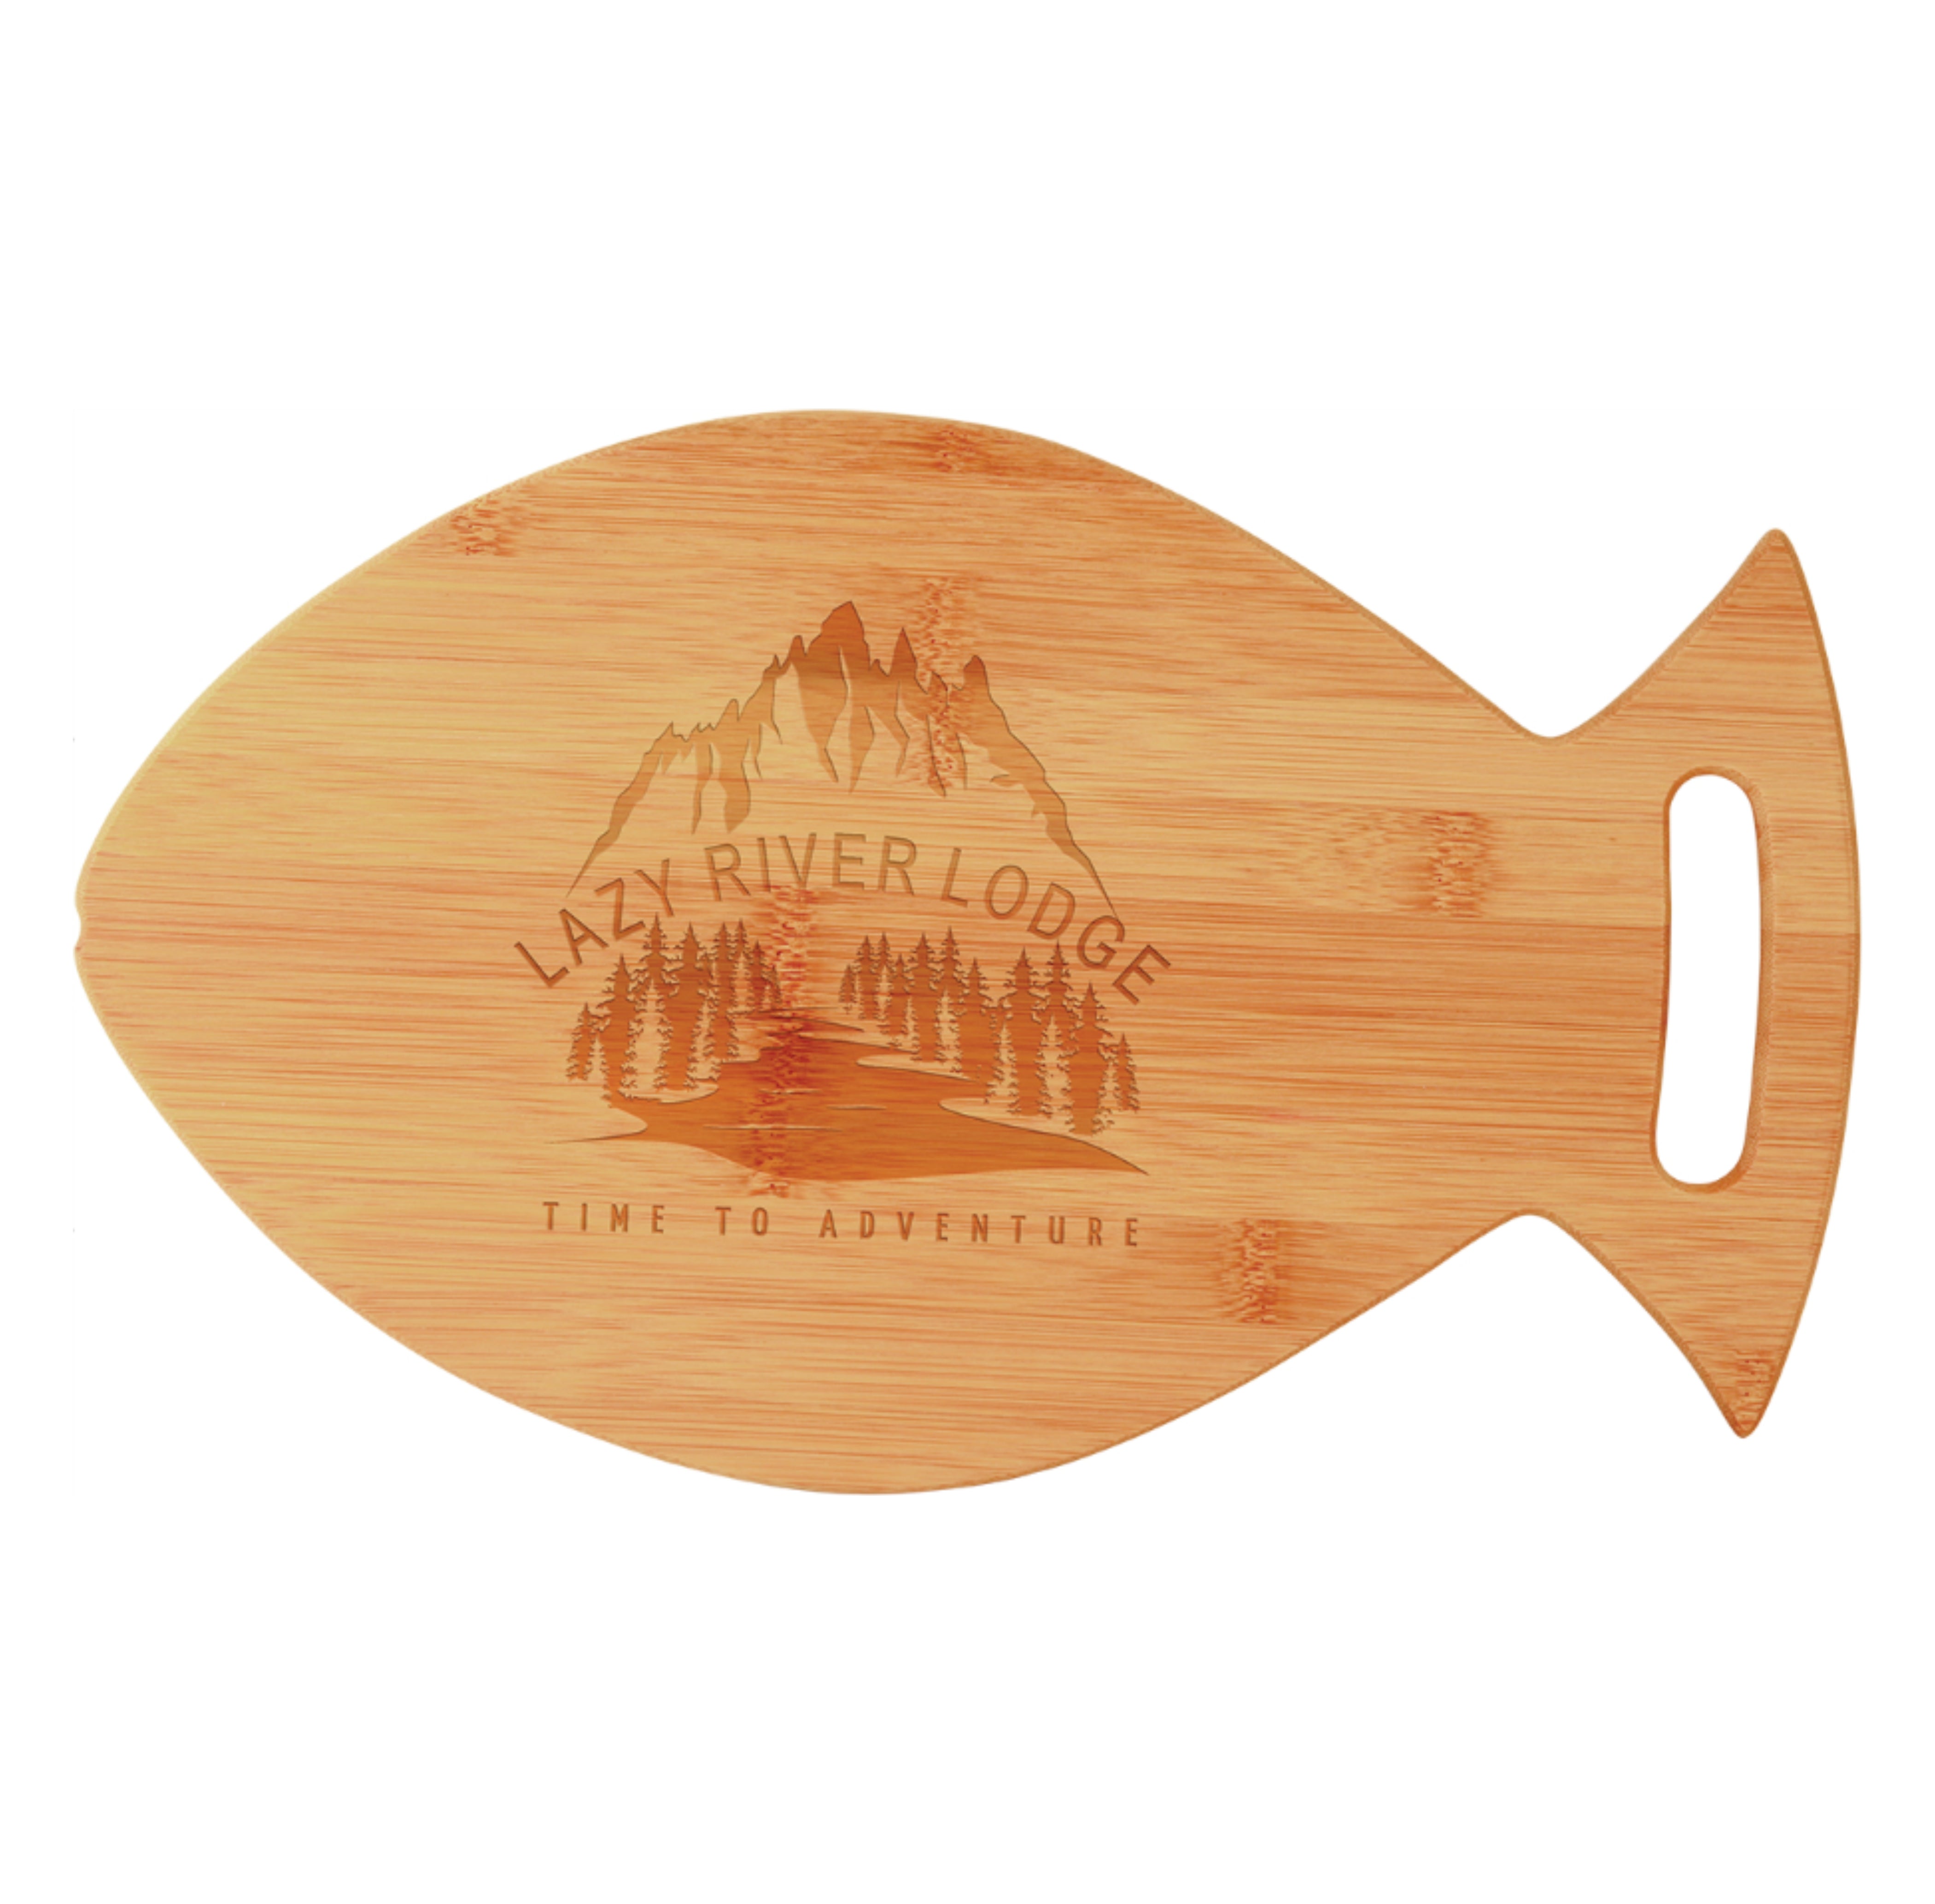 Bamboo Fish Shaped Cutting Board, Cutting Board, Fishing, Father's Day, Personalized Gift, Customized, Mother's Day - BirdsWoodShack